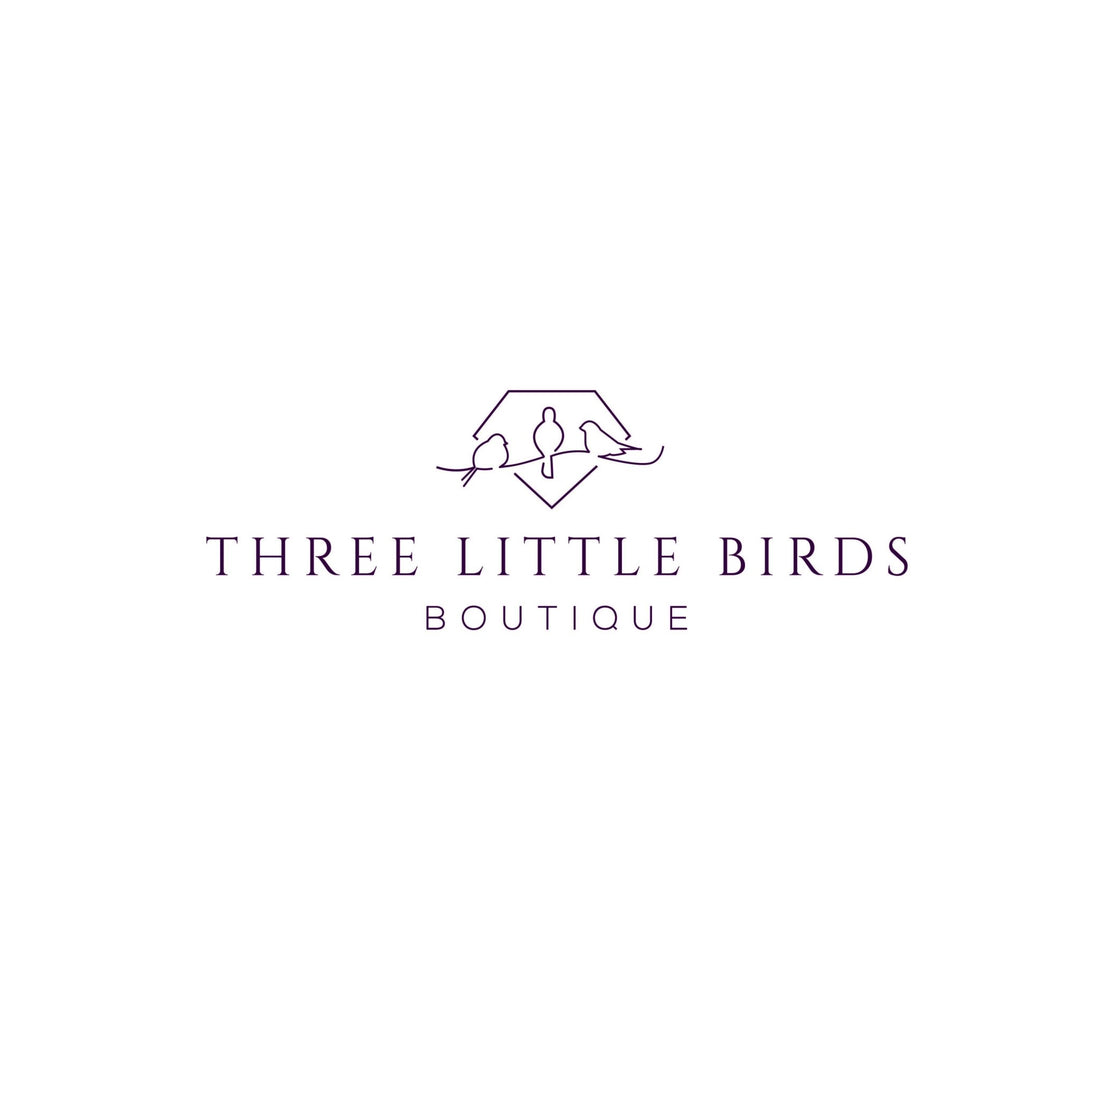 TLB Cares: Important Update - The TLB Boutique